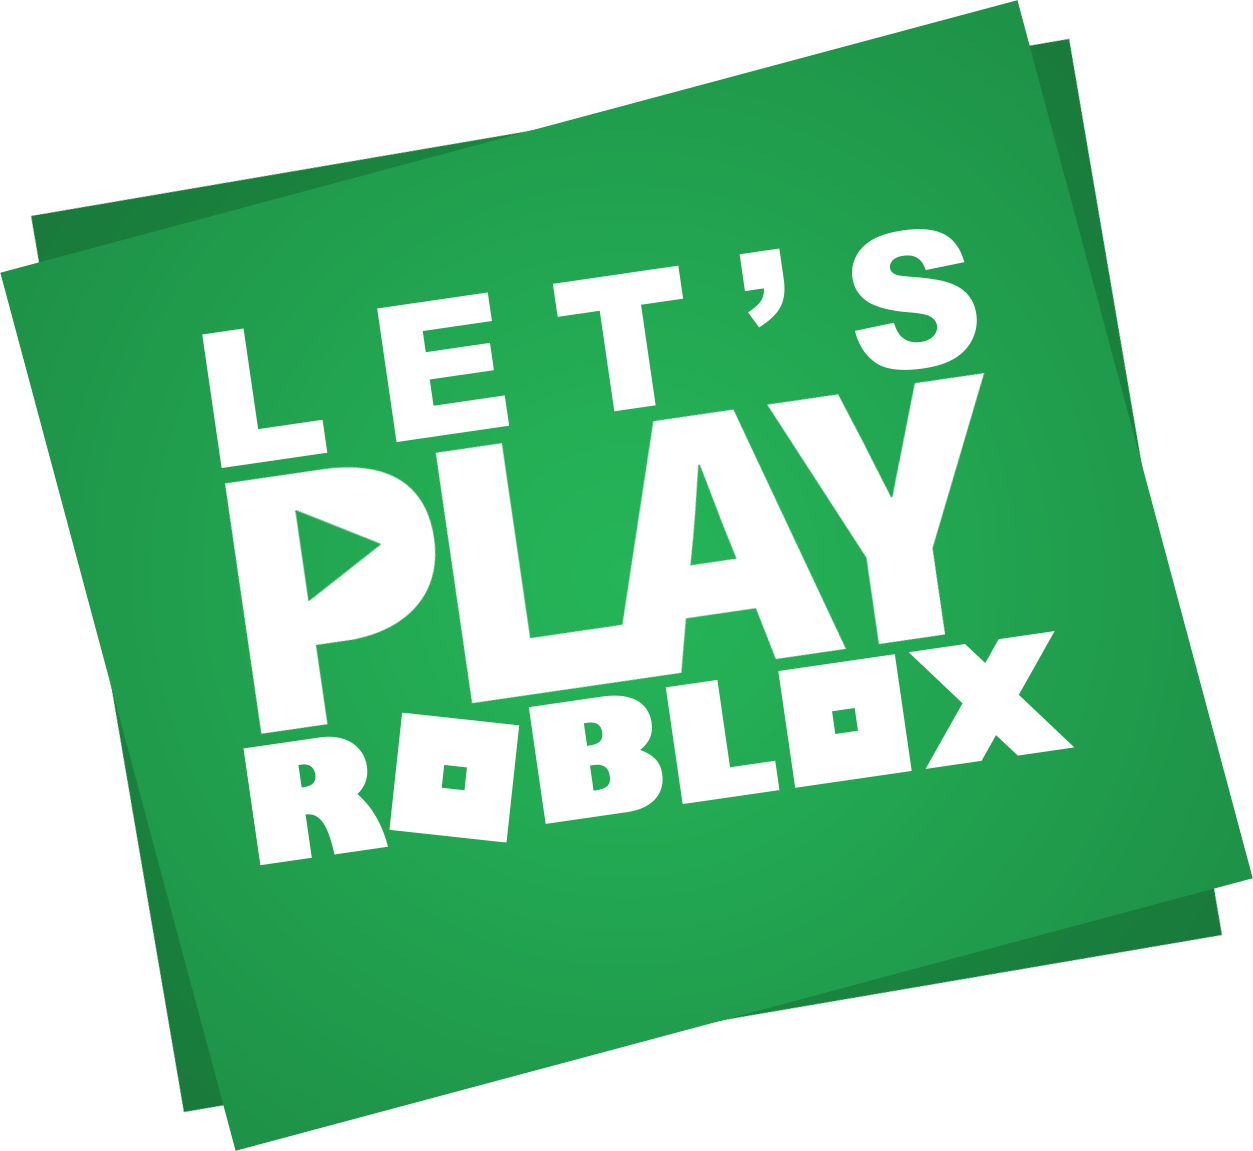 Roblox It S Time To Break Out On Letsplayroblox Play Cops And Robbers Games With Us Today At 2pm Pdt T Co Gh5zvlisip T Co Qcpsr3aj3l Twitter